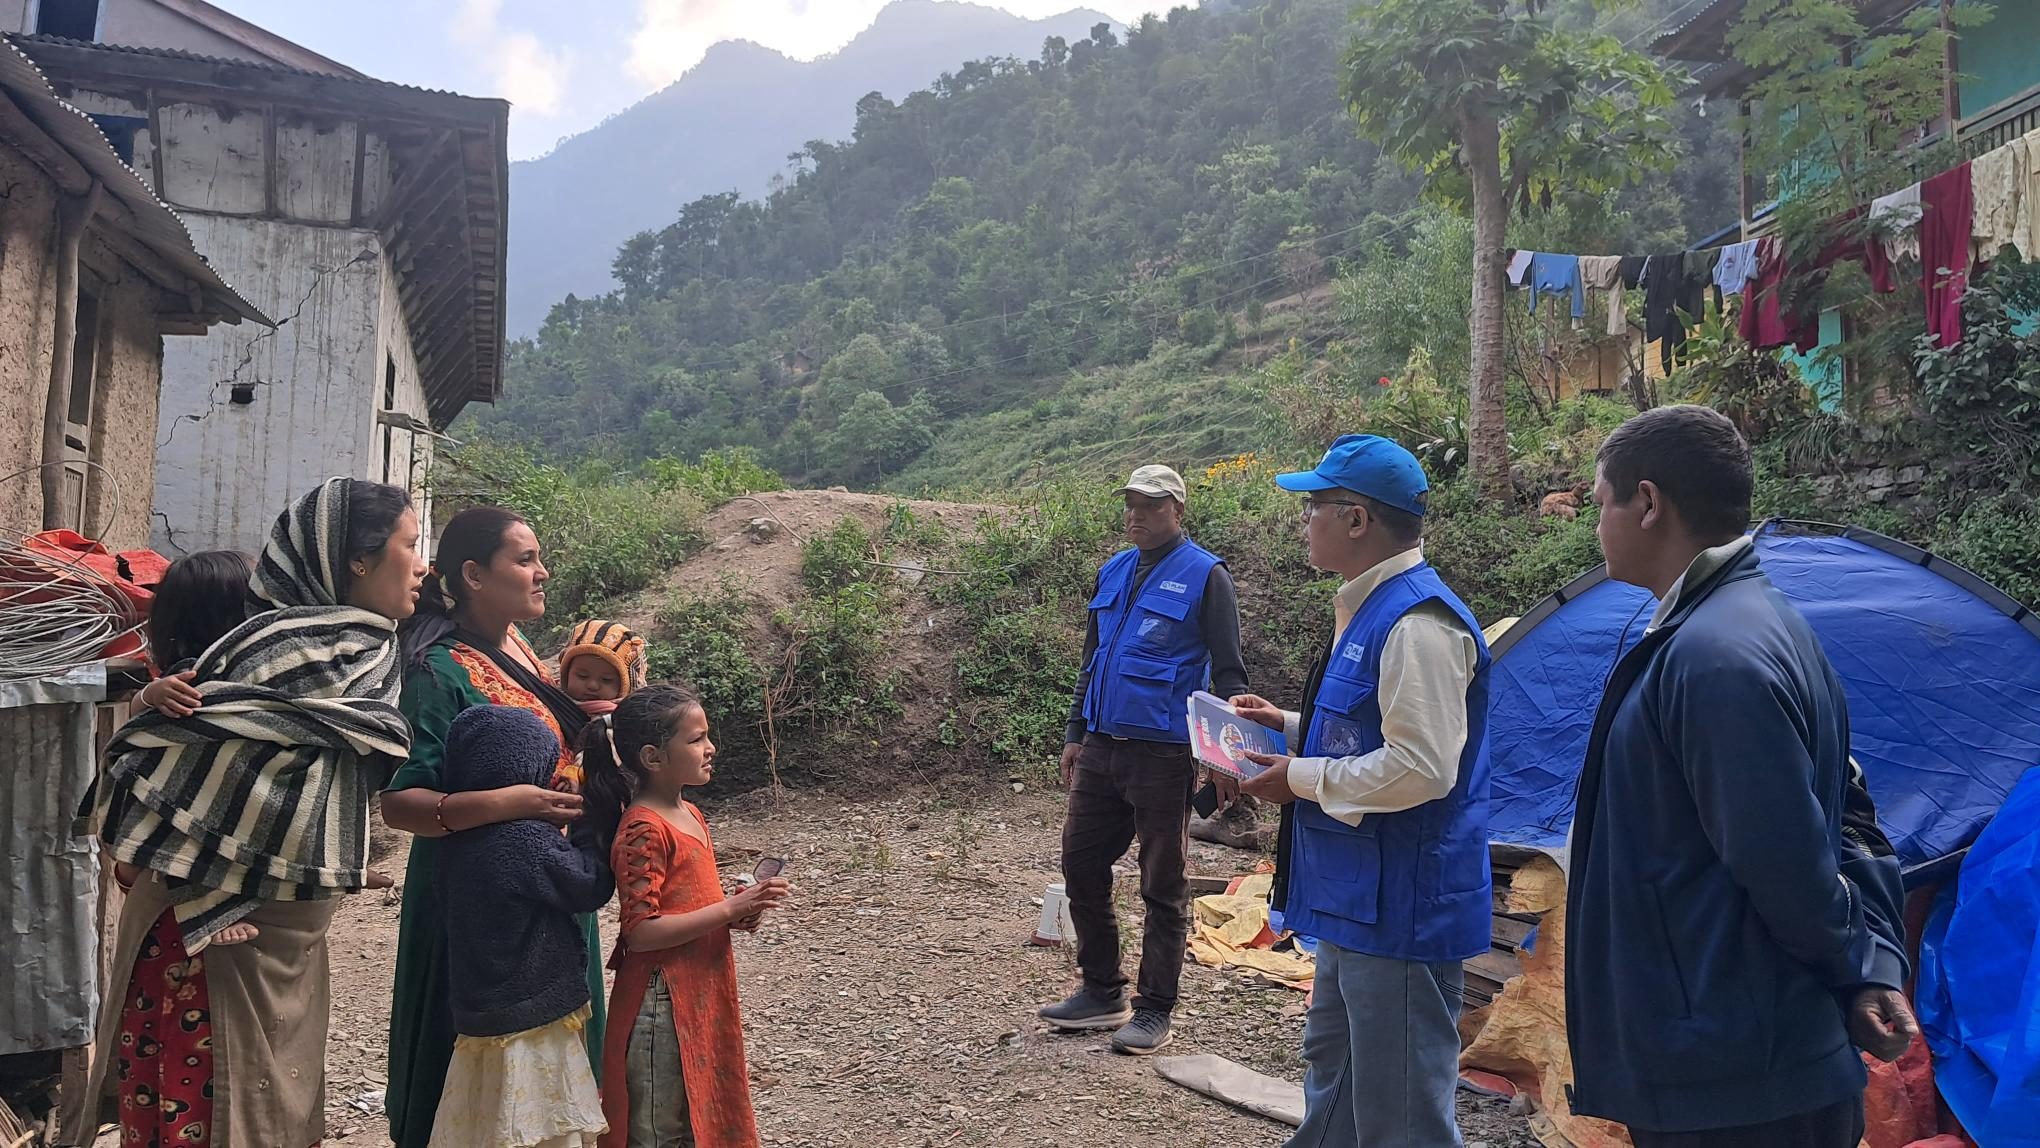 Plan International staff interacting with earthquake affected people in Jajarkot.